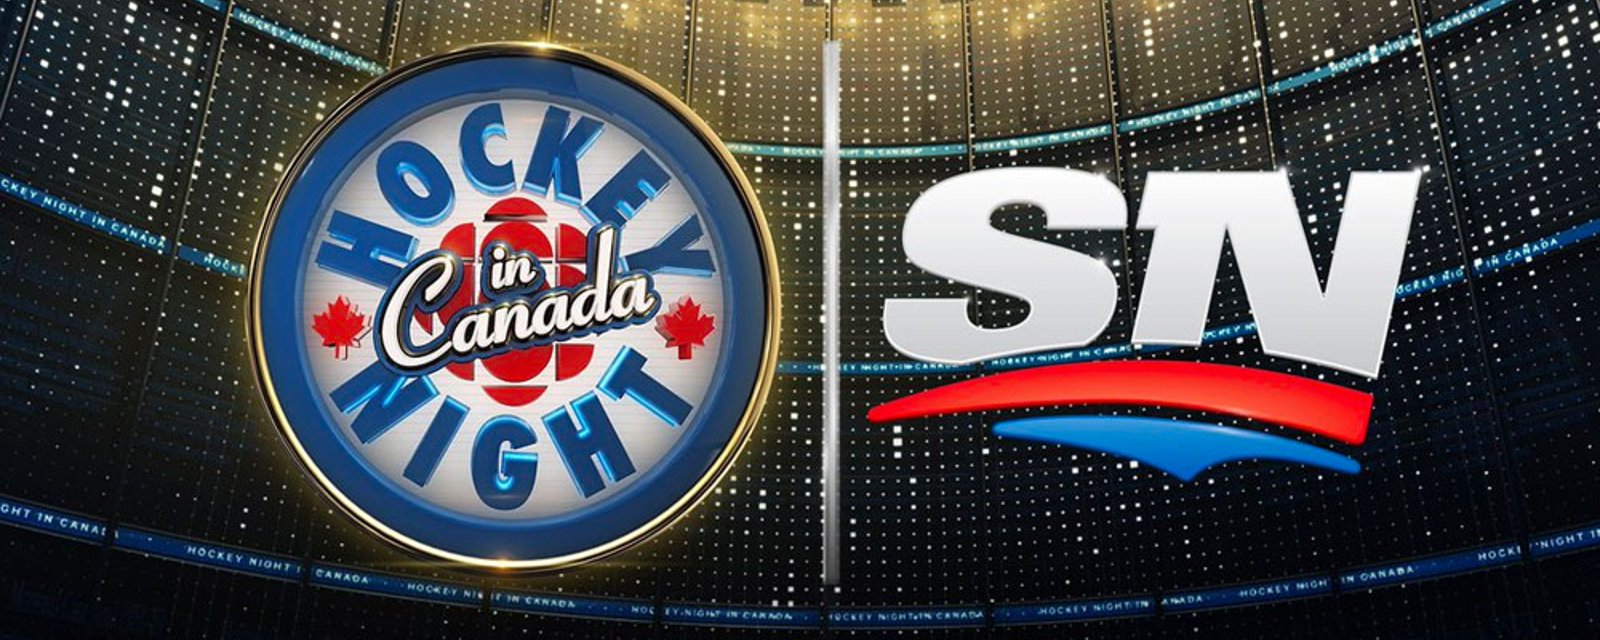 Sportsnet broadcaster officially leaves after 20 years